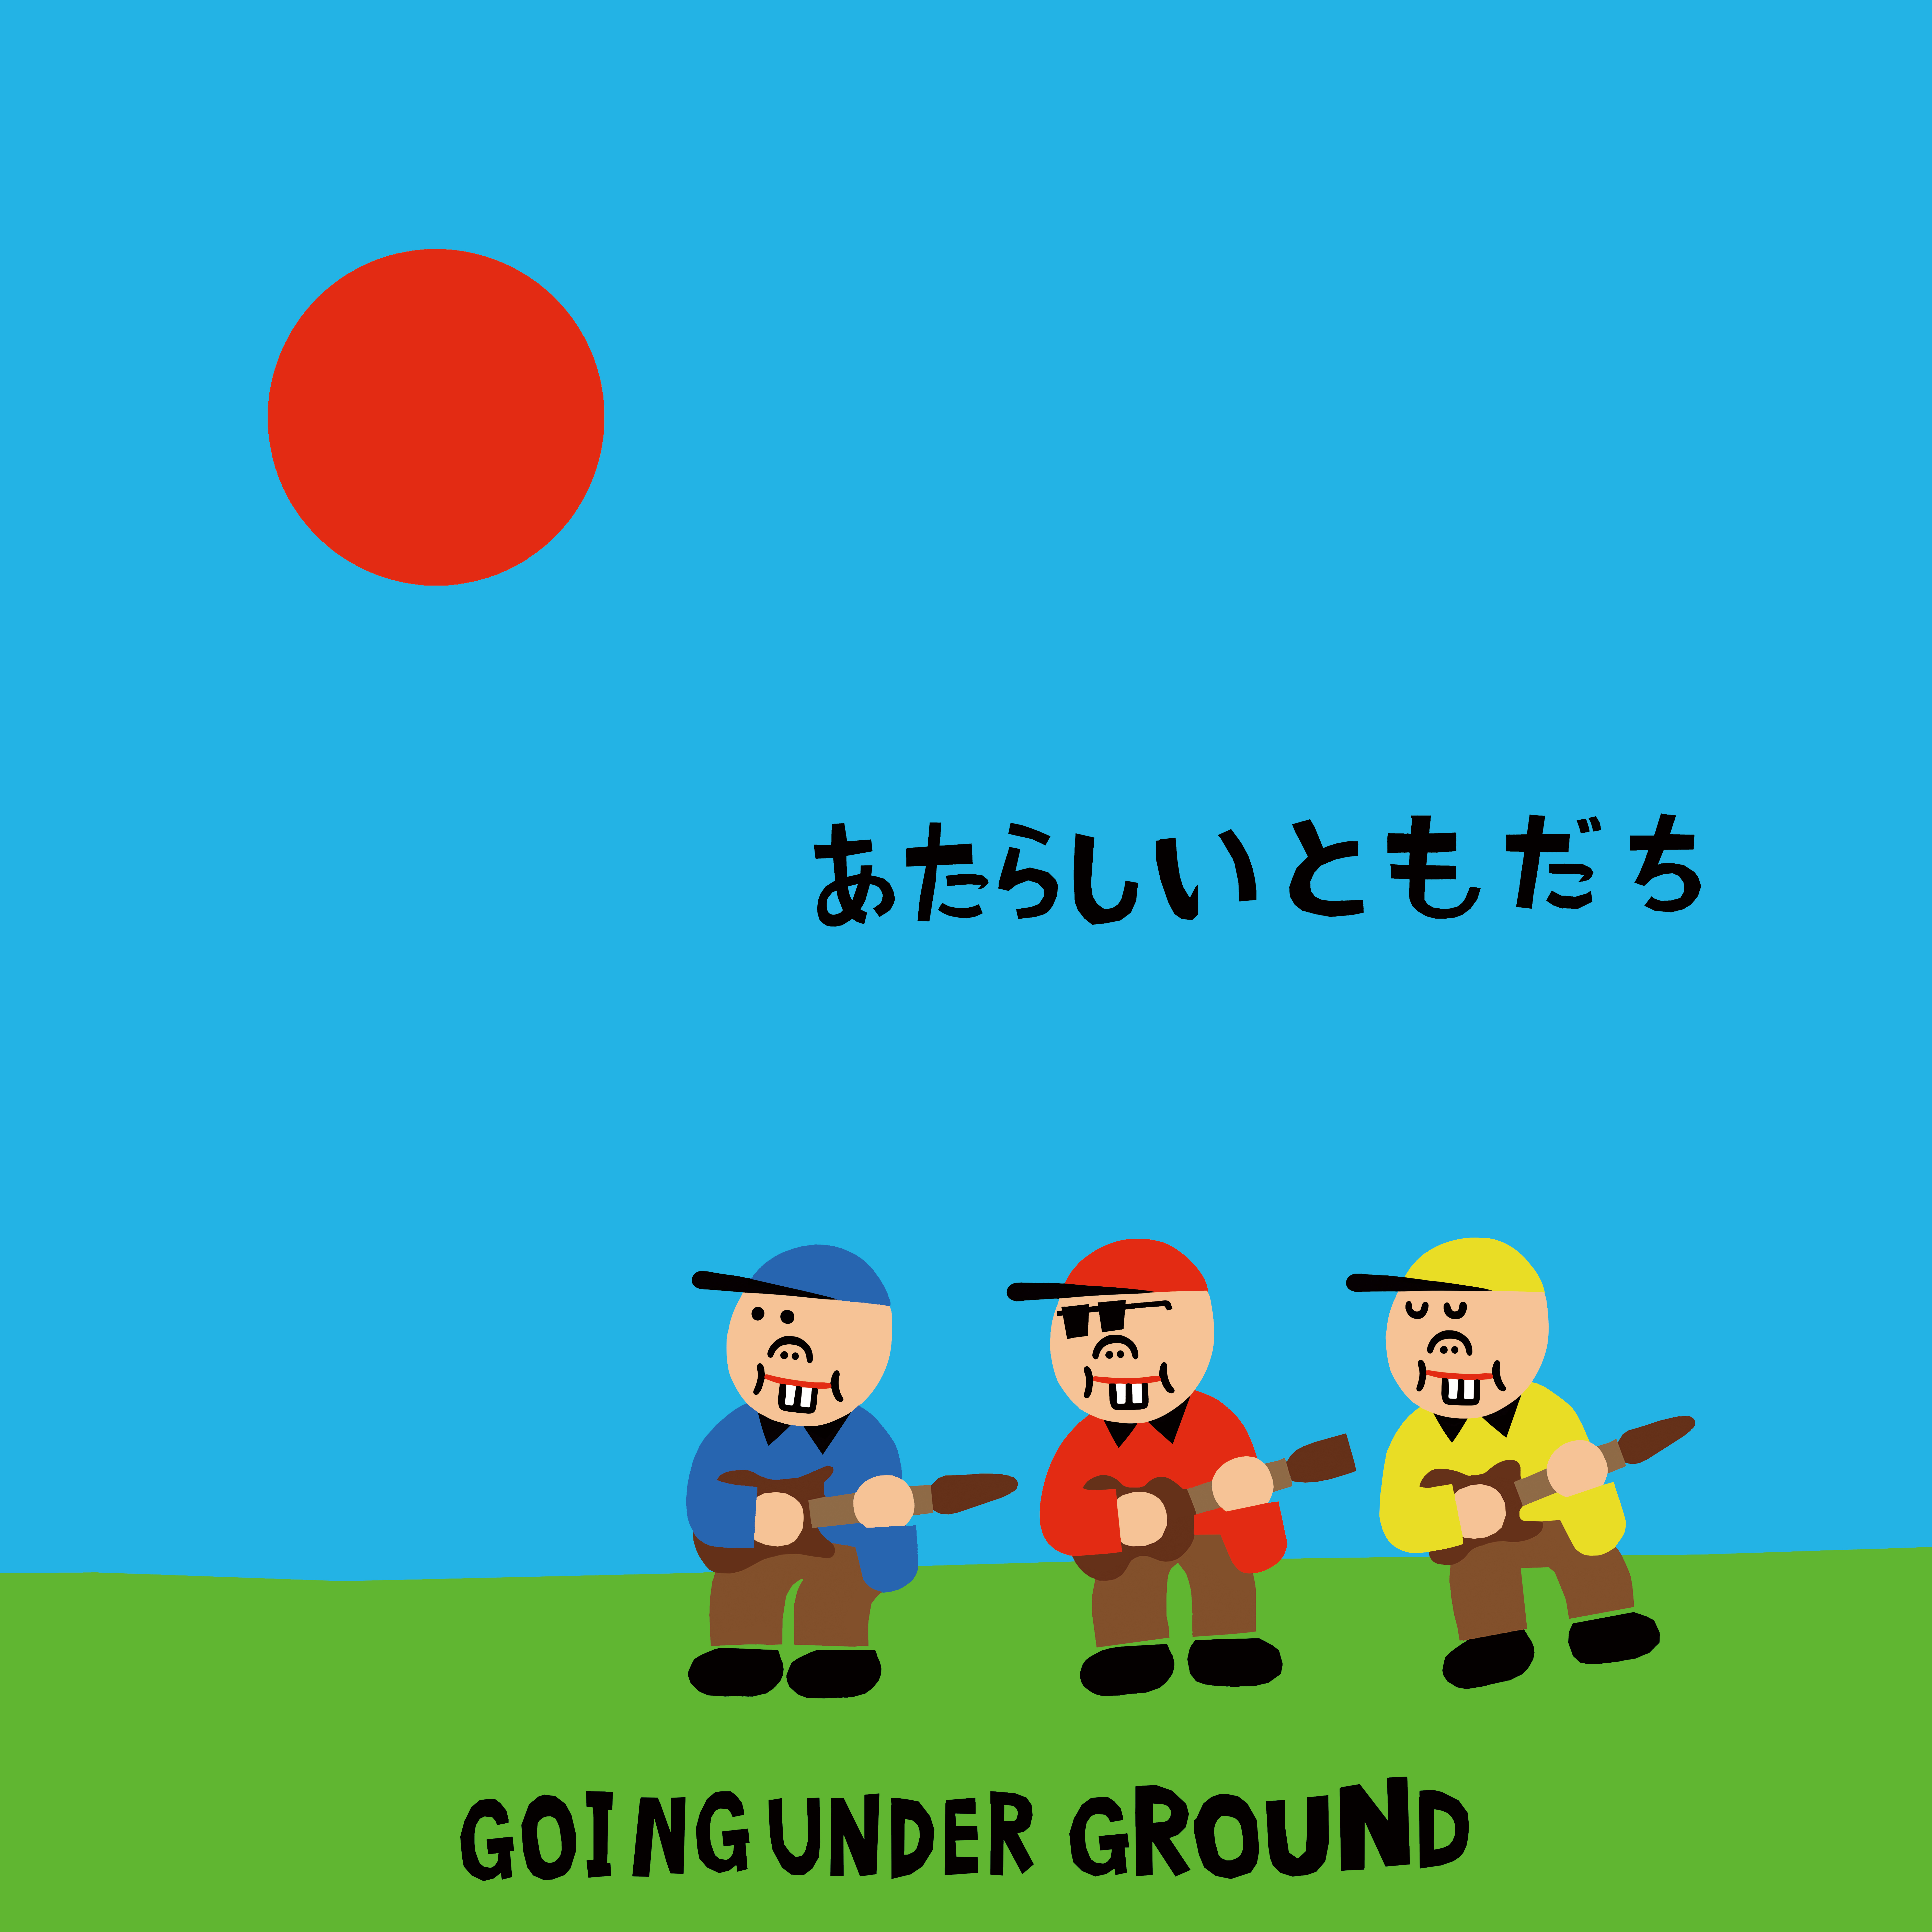 GOING UNDER GROUND official Site